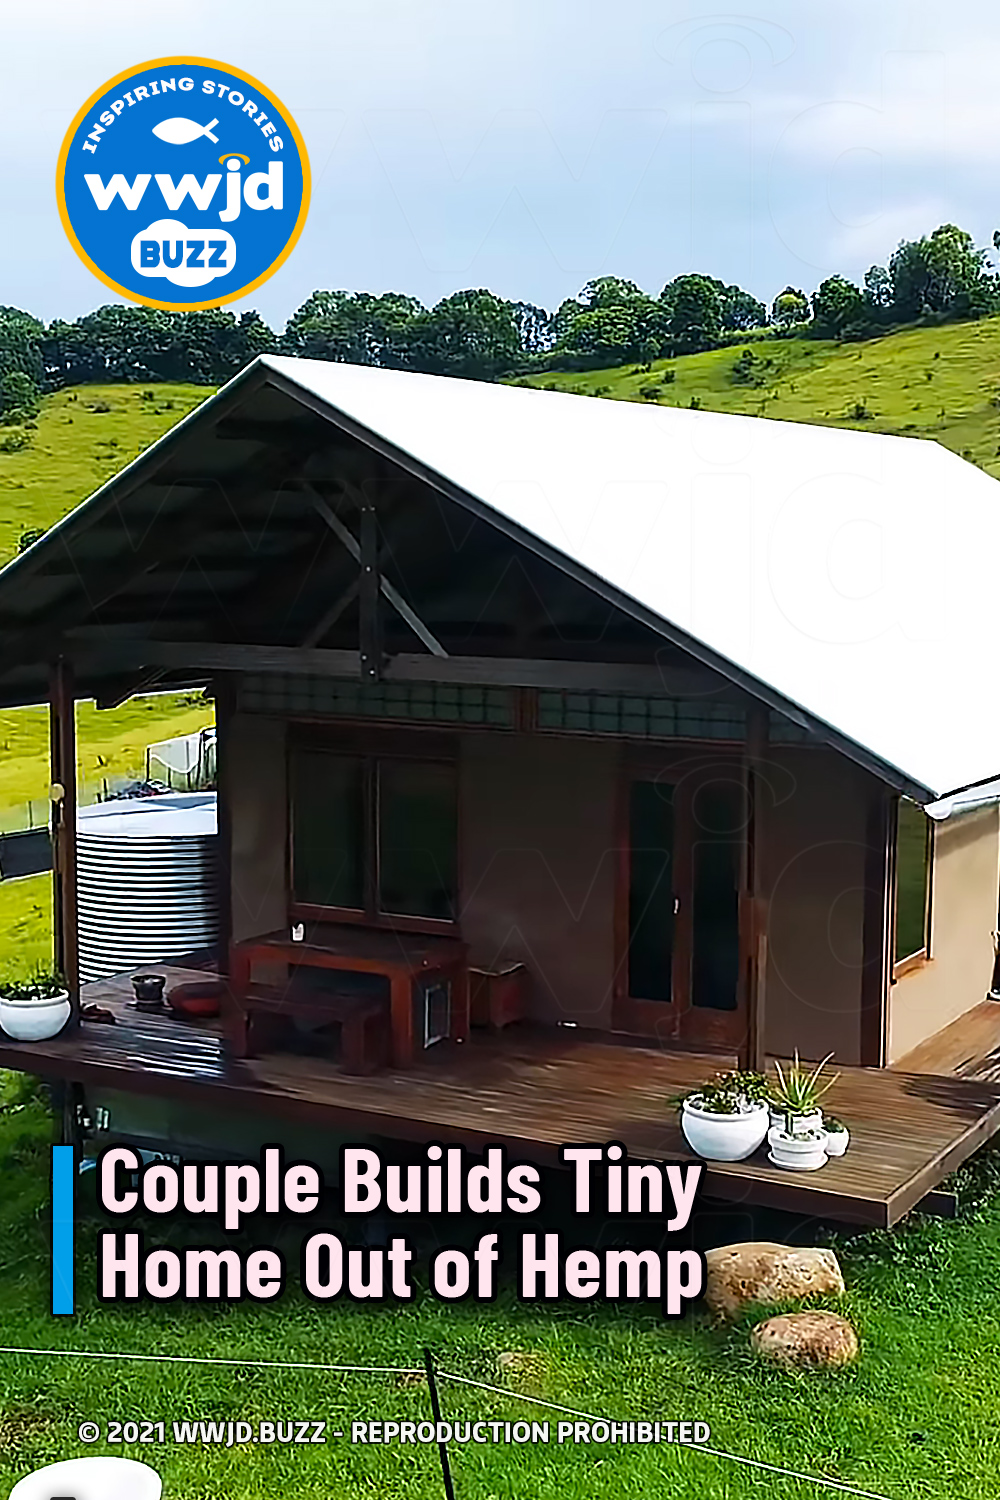 Couple Builds Tiny Home Out of Hemp